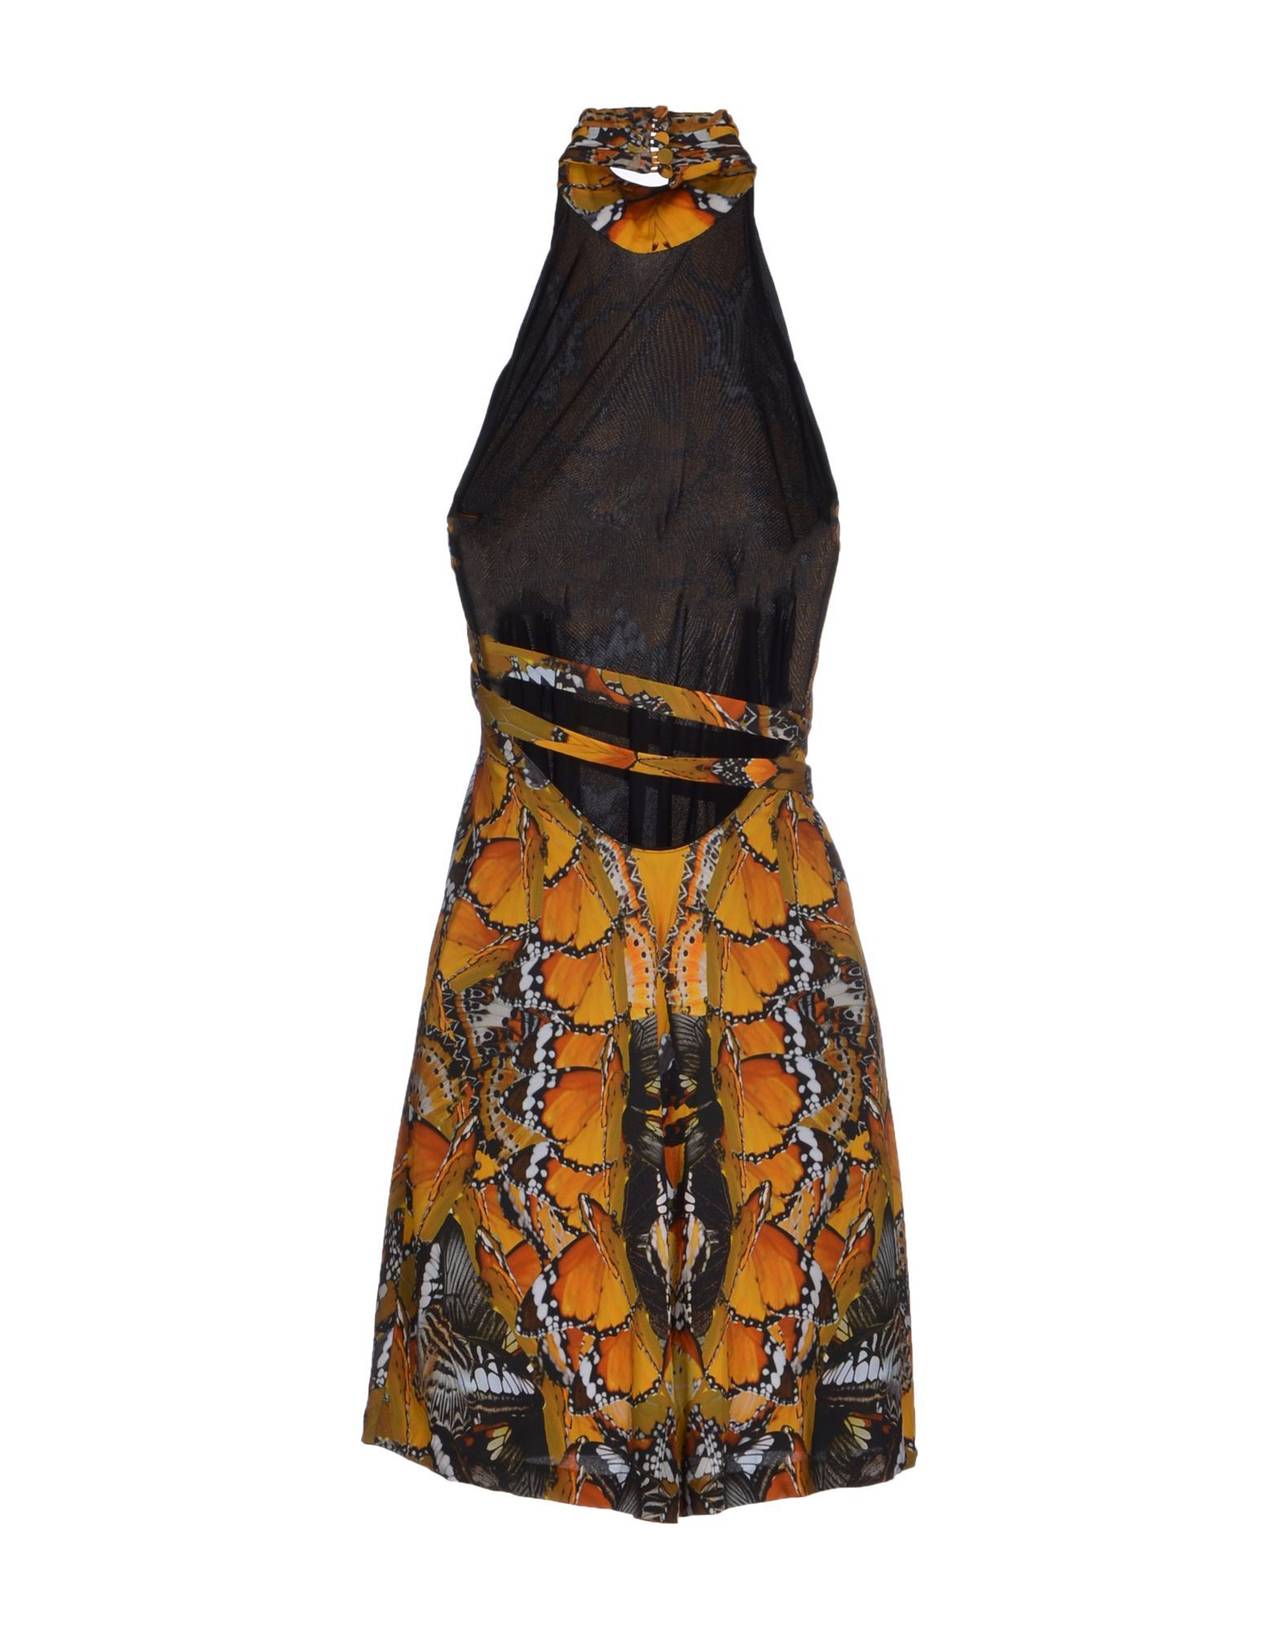 Alexander McQueen New Silk Butterfly Dress, SS 2011 In New Condition For Sale In Bethesda, MD